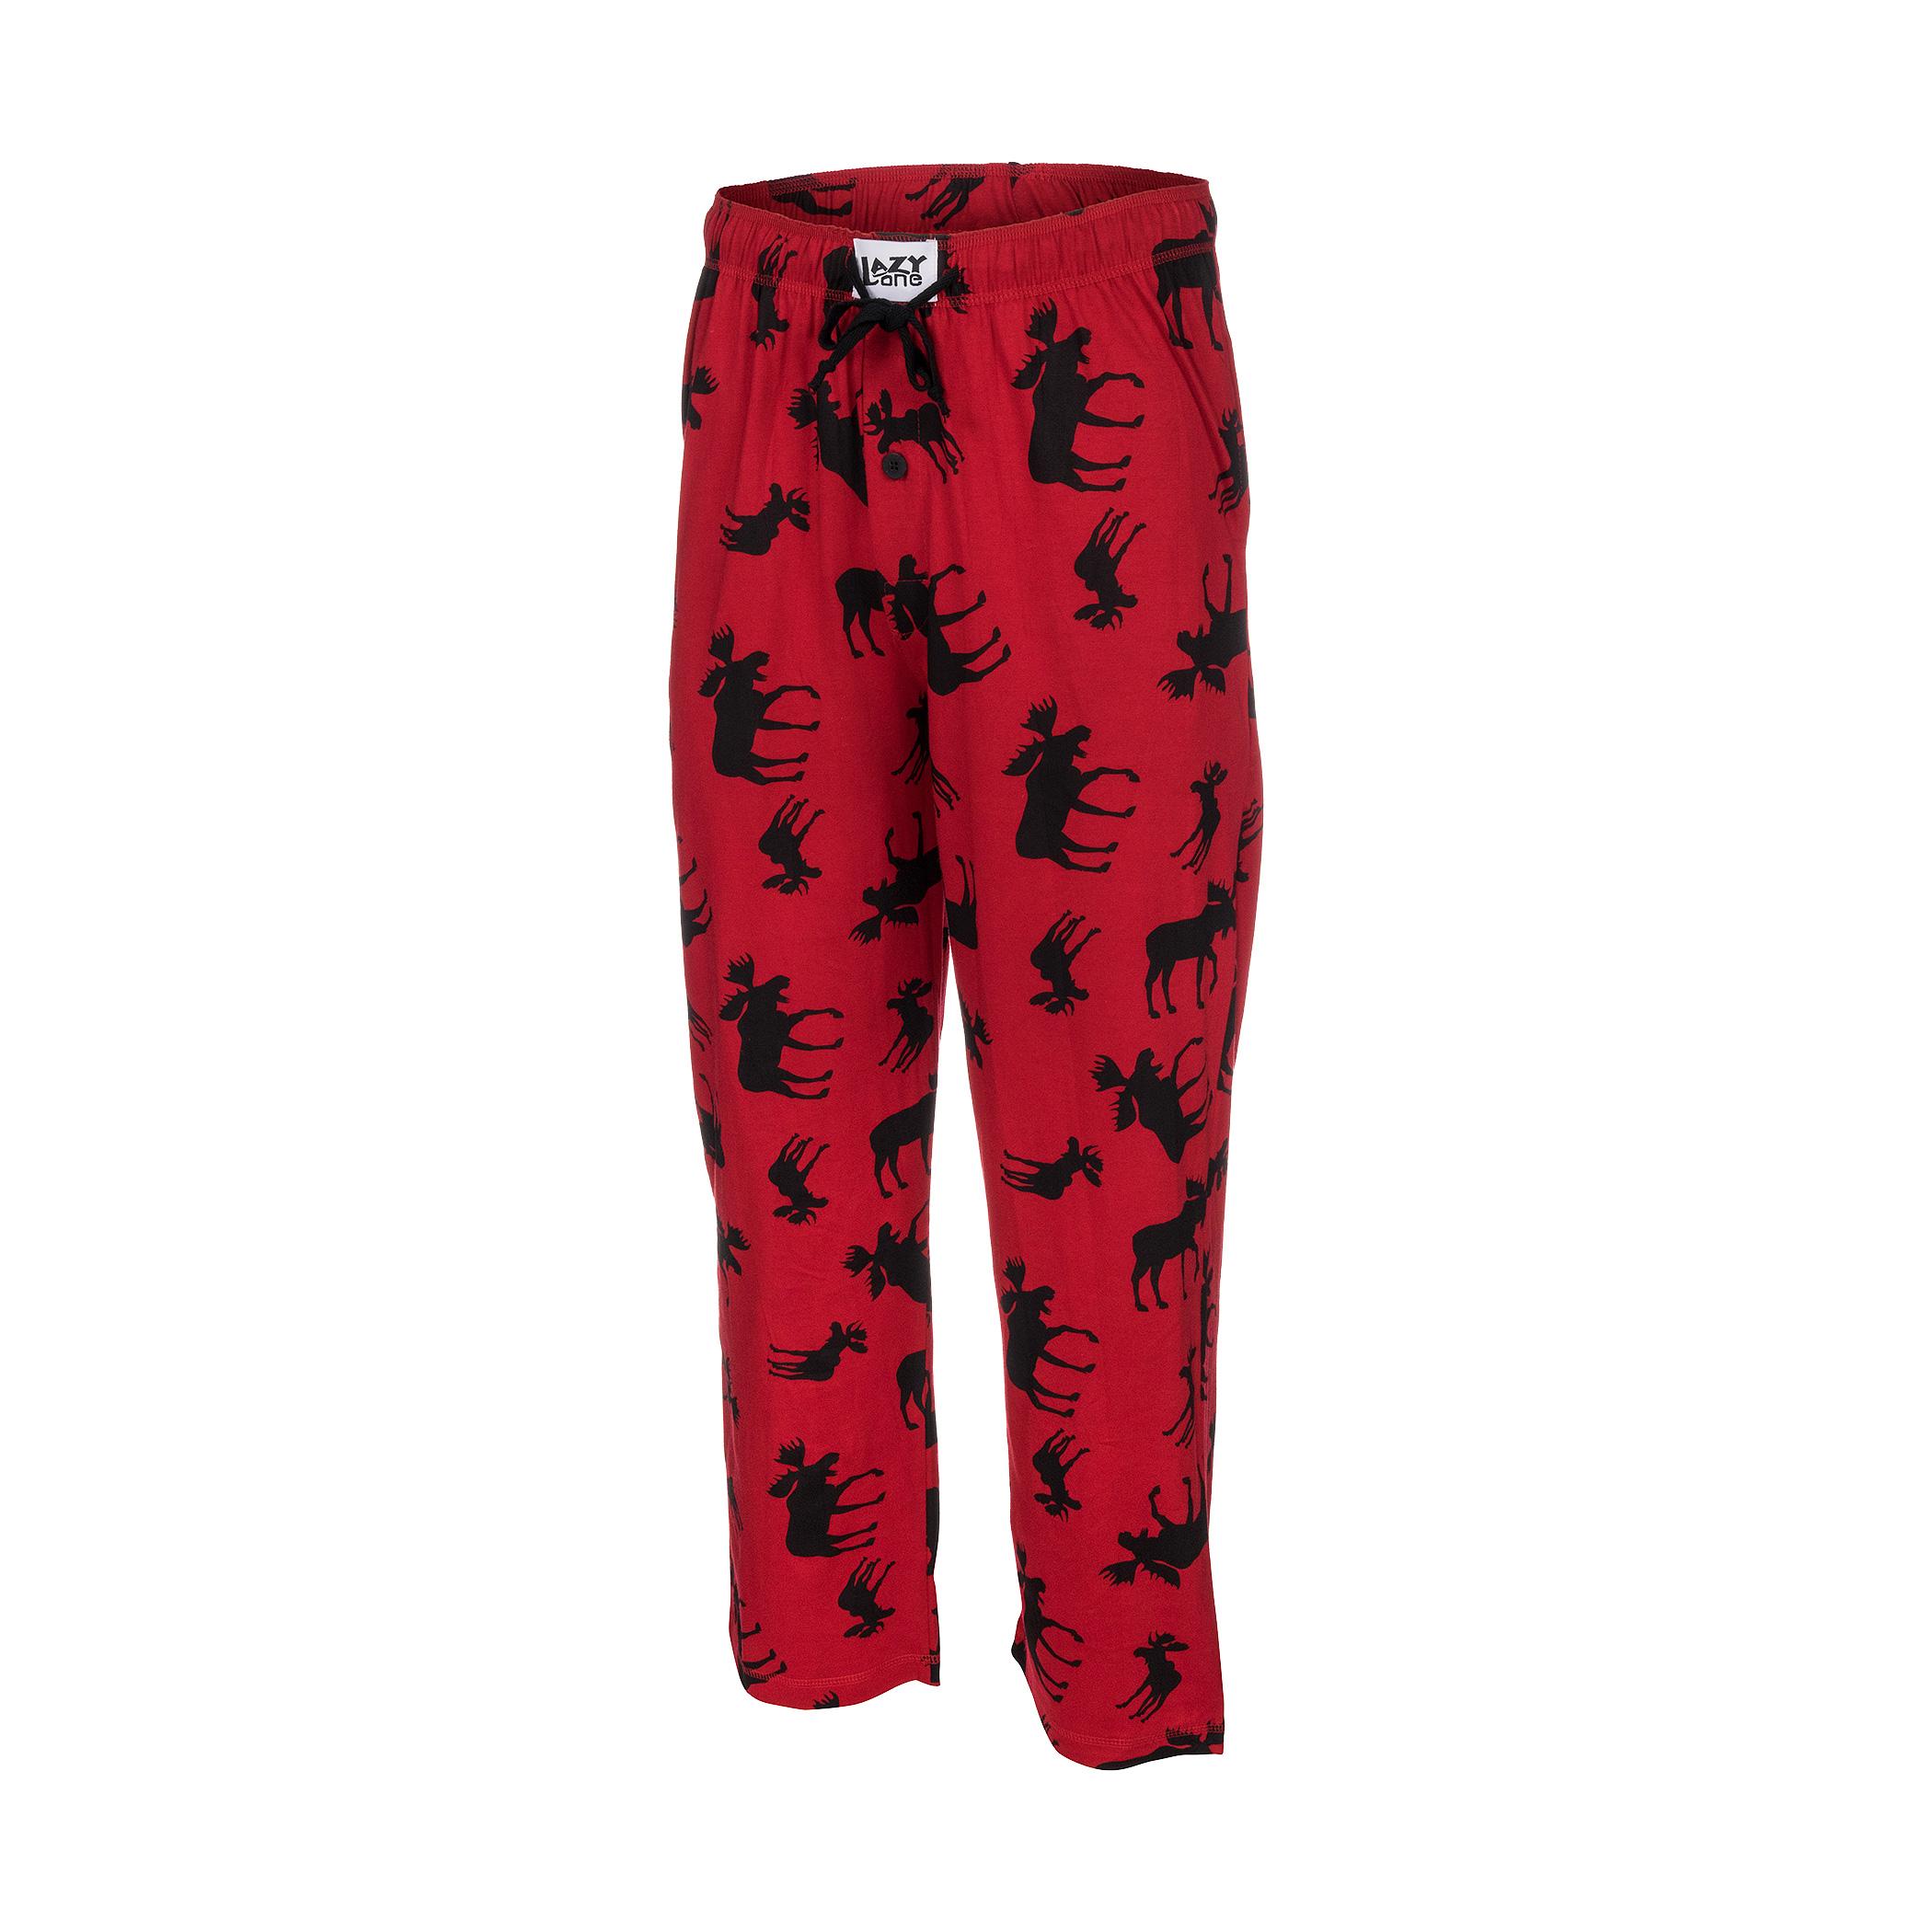 Lazy One Pajama Pants for Men, Cotton Long Johns for Men (Fly